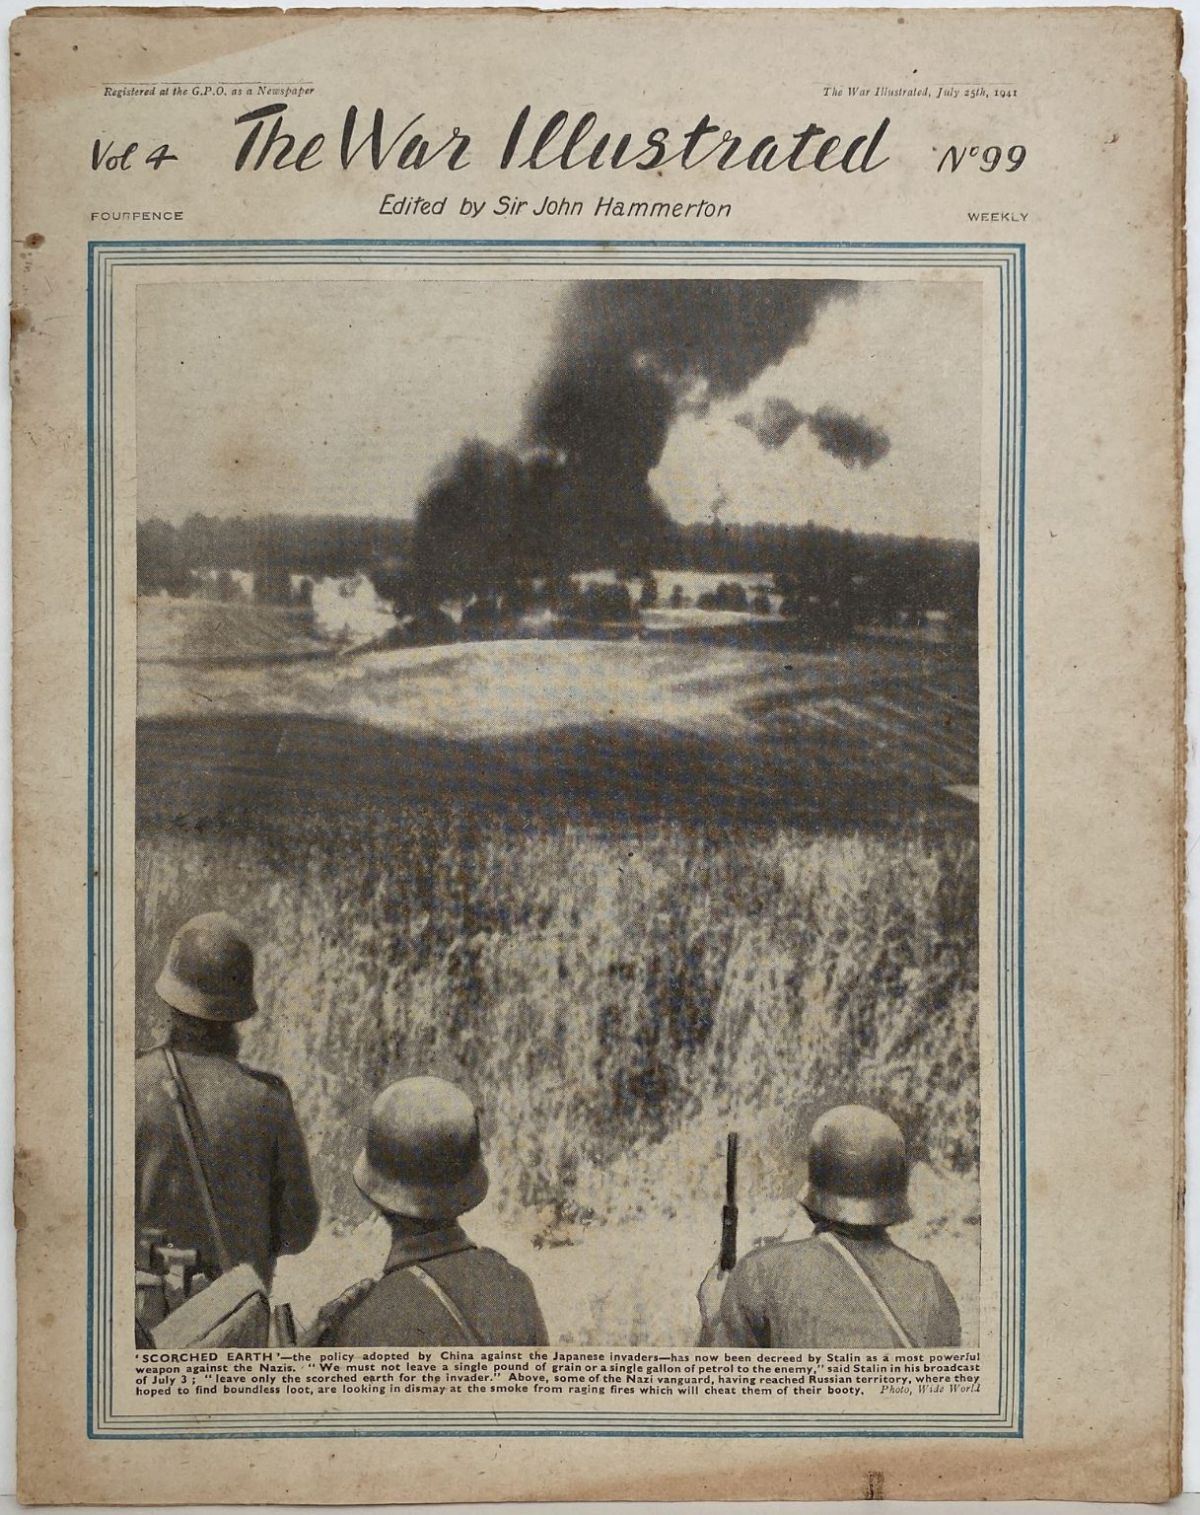 THE WAR ILLUSTRATED - Vol 4, No 99, 25th July 1941